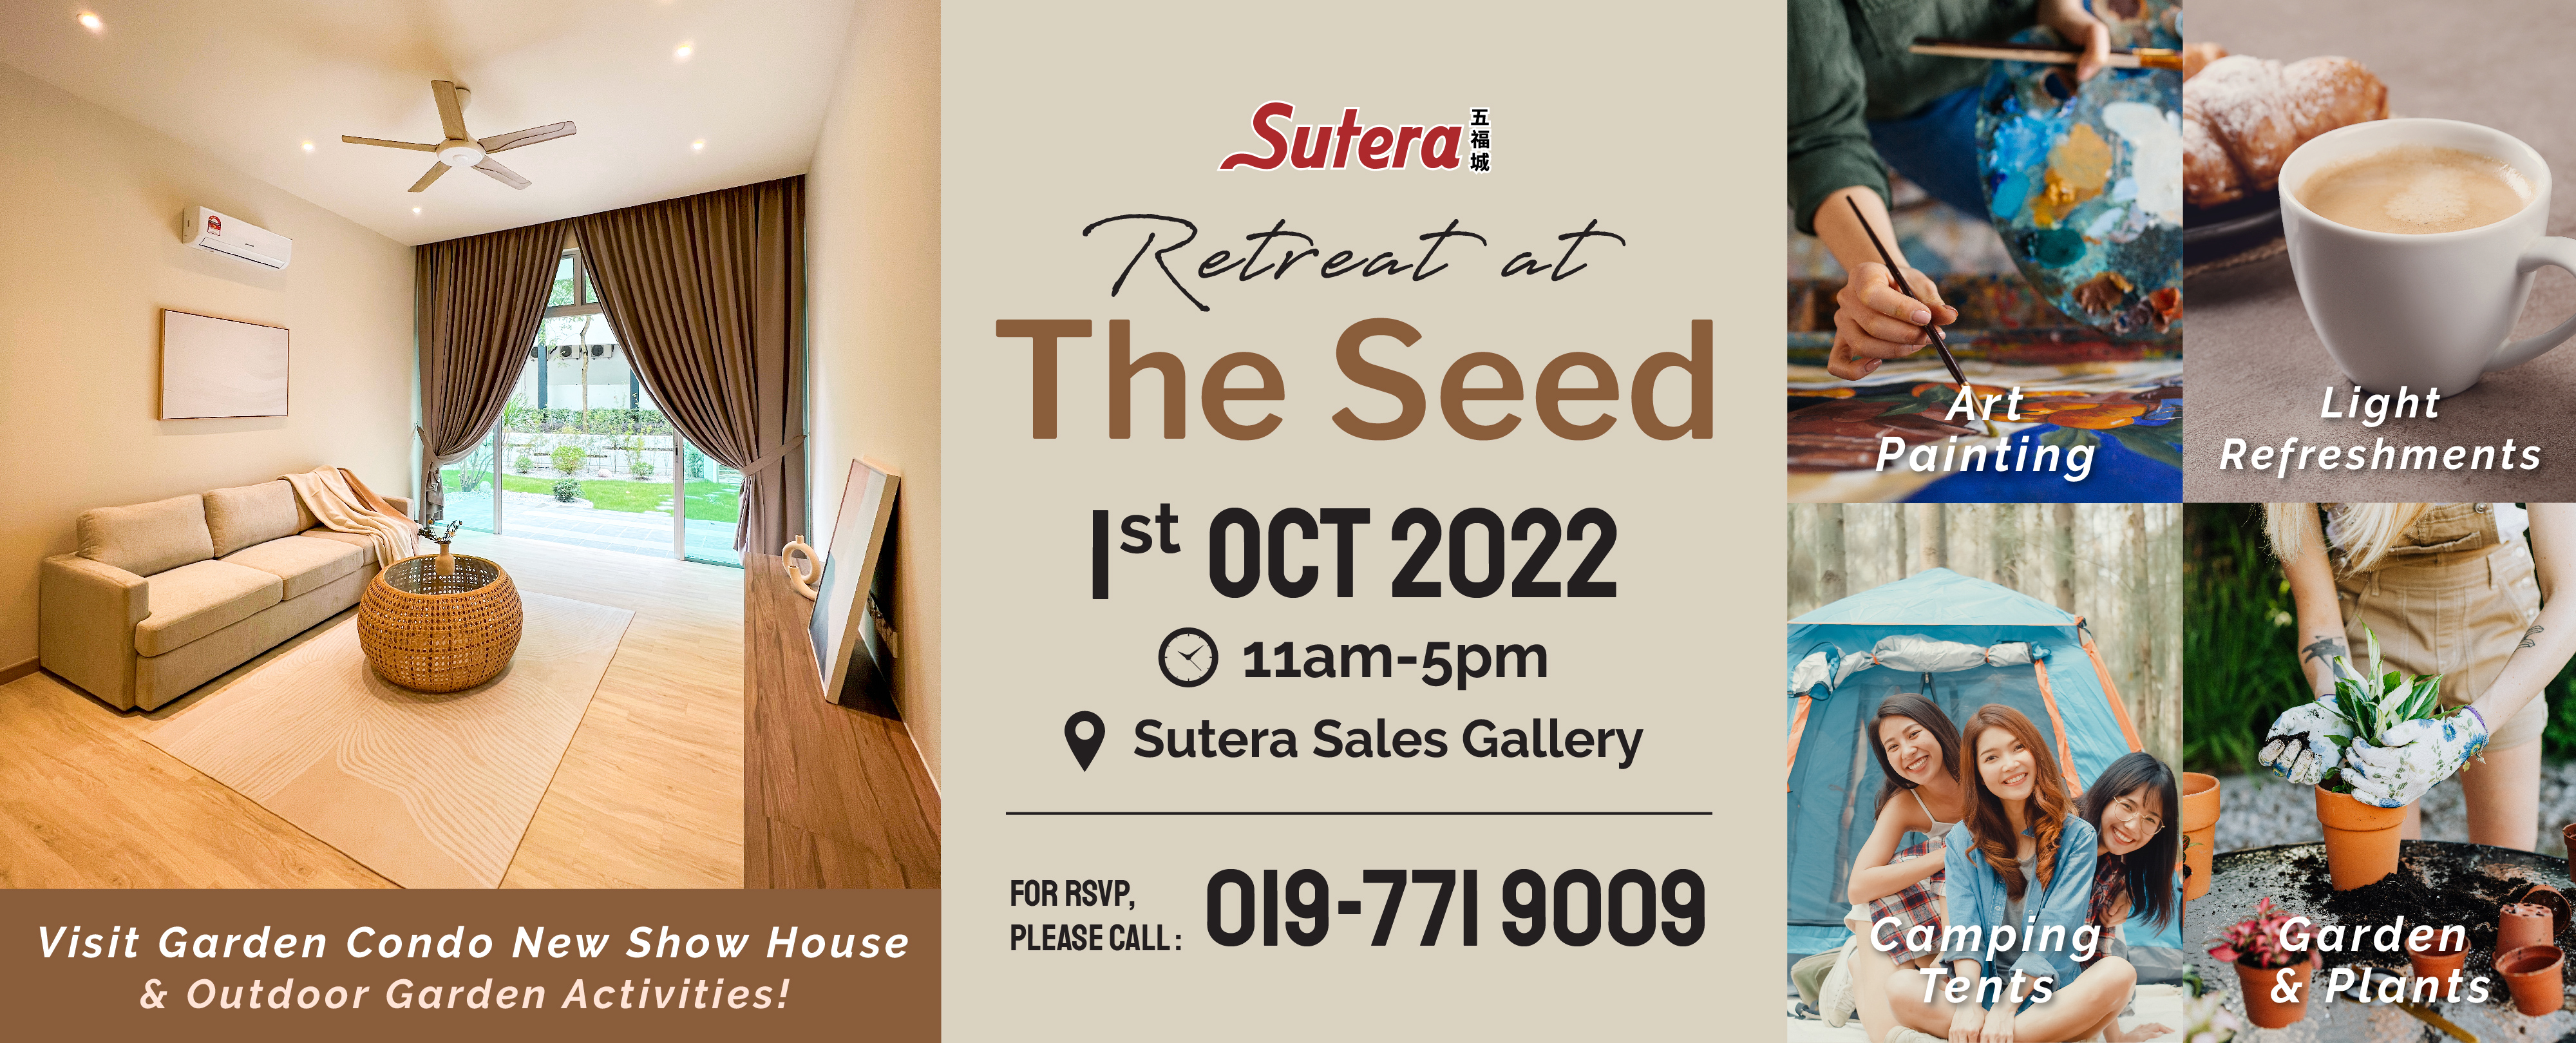 Retreat at The Seed